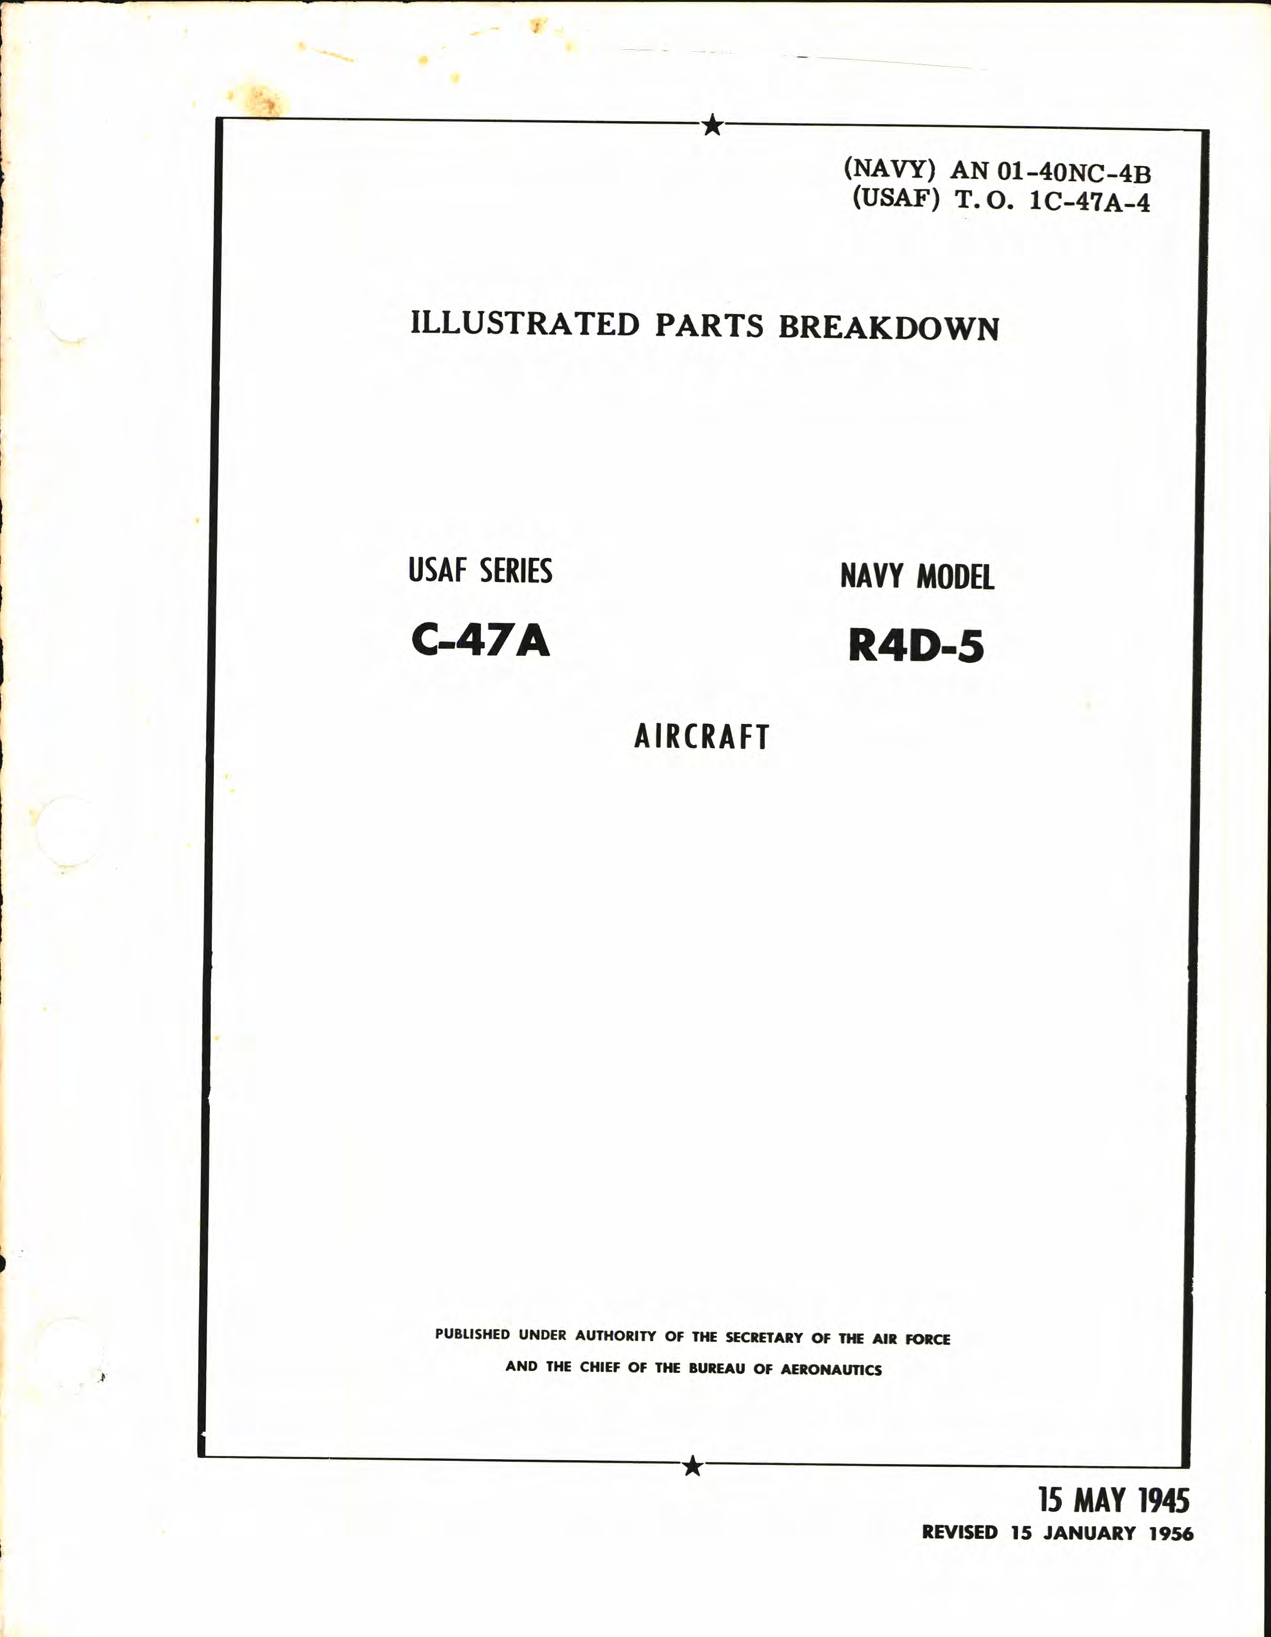 Sample page 1 from AirCorps Library document: Illustrated Parts Breakdown for C-47A and R4D-5 Aircraft